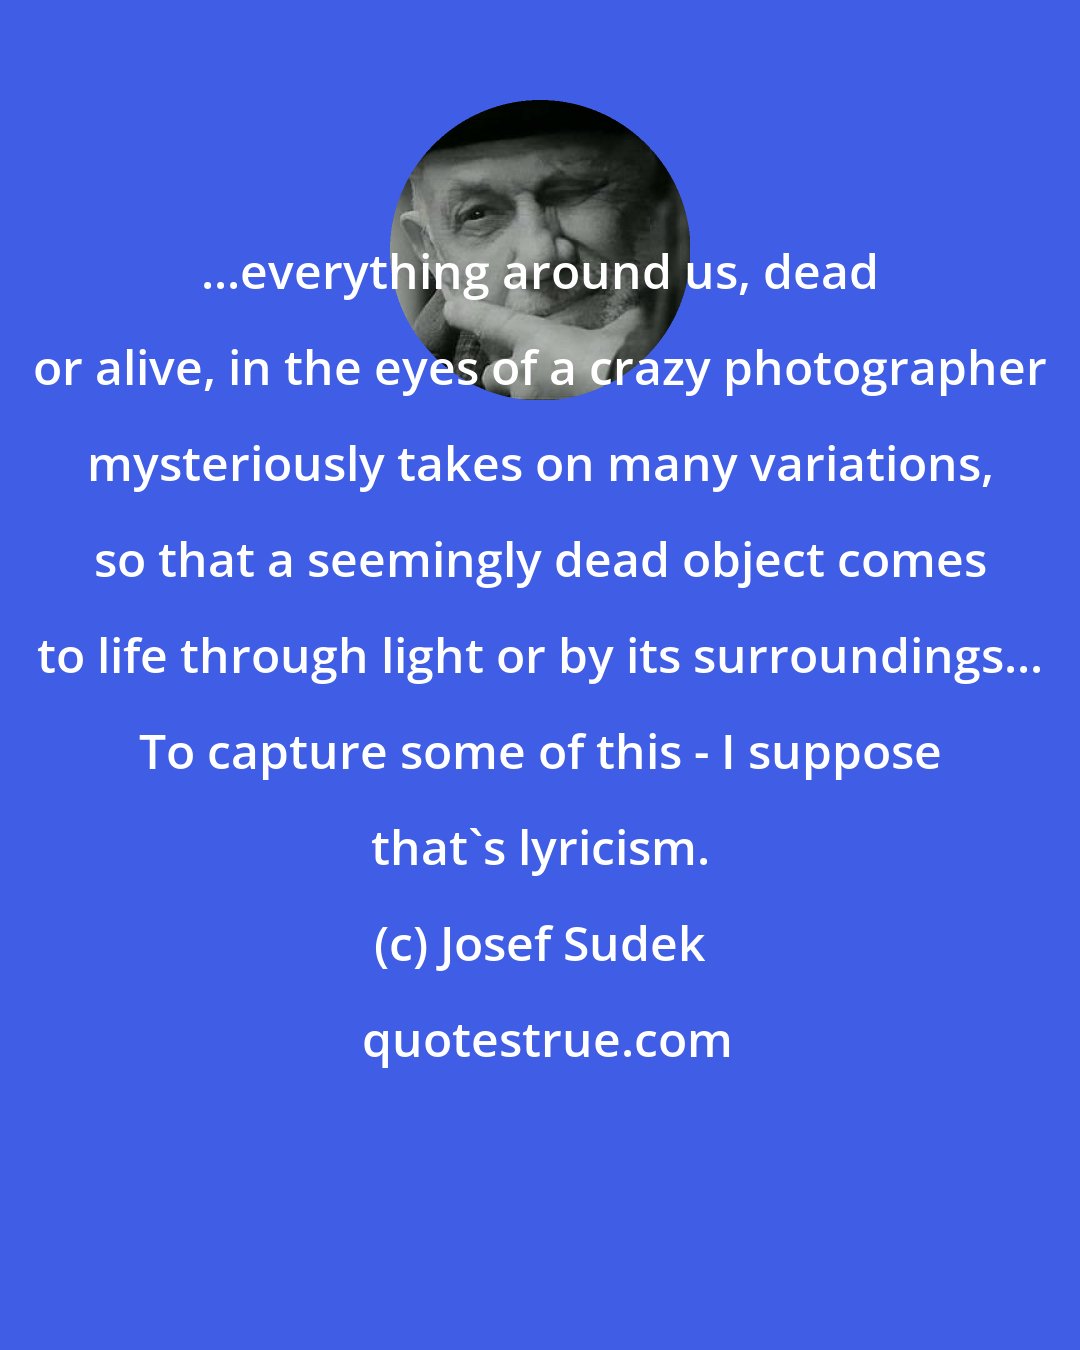 Josef Sudek: ...everything around us, dead or alive, in the eyes of a crazy photographer mysteriously takes on many variations, so that a seemingly dead object comes to life through light or by its surroundings... To capture some of this - I suppose that's lyricism.